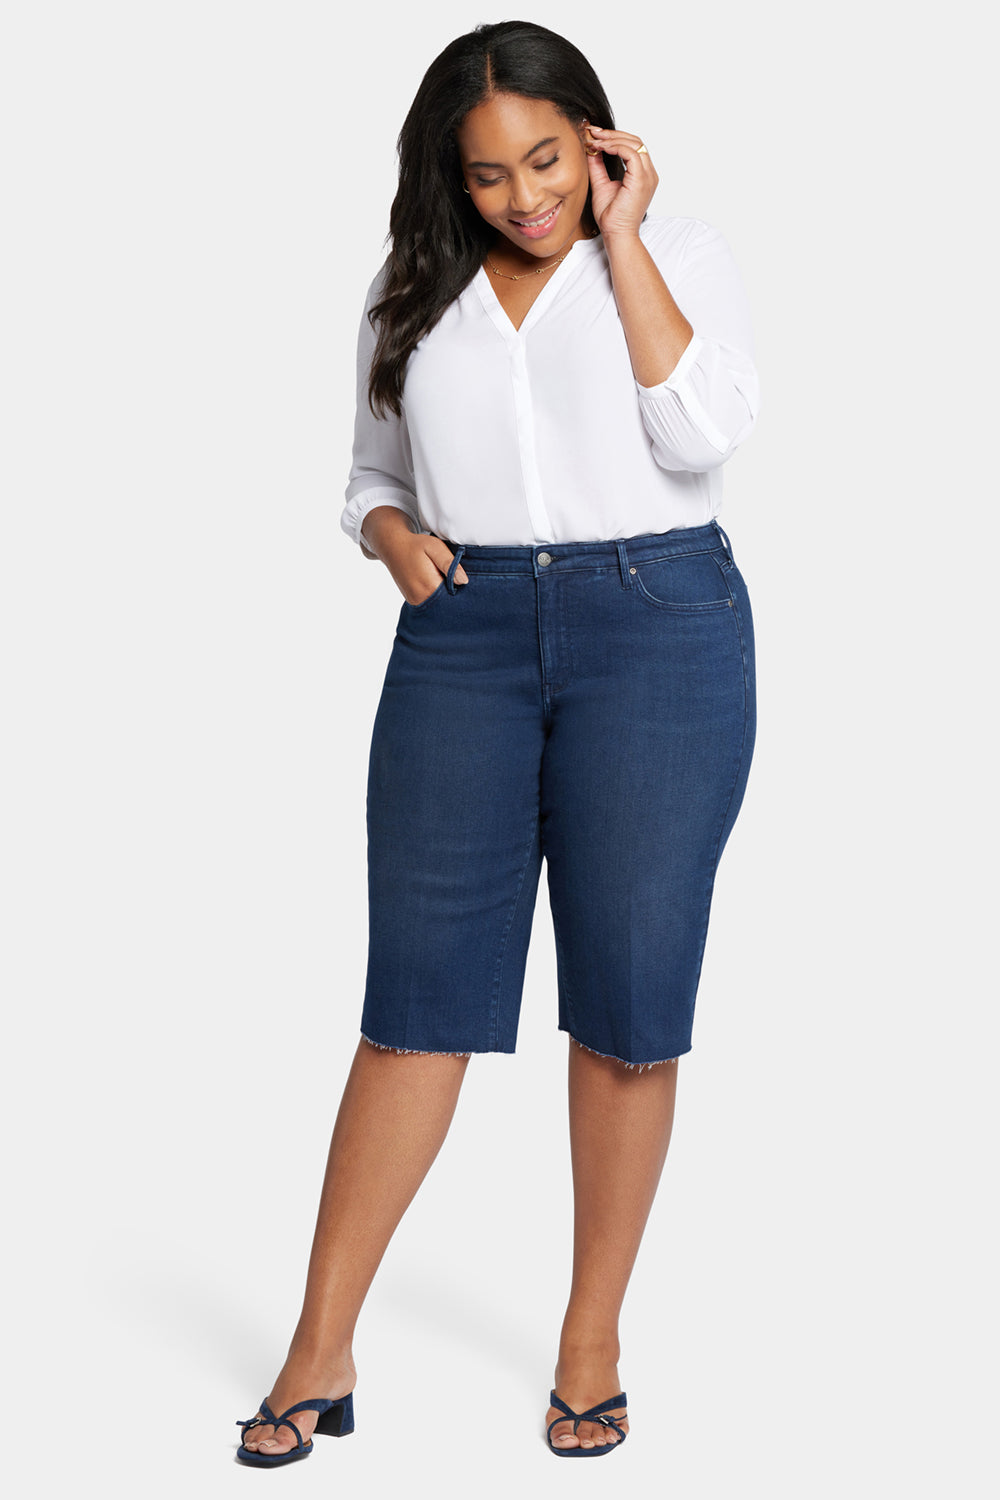 NYDJ Kristie 80s Bermuda Denim Shorts In Plus Size With Pressed Creases And Raw Hems - Inspire